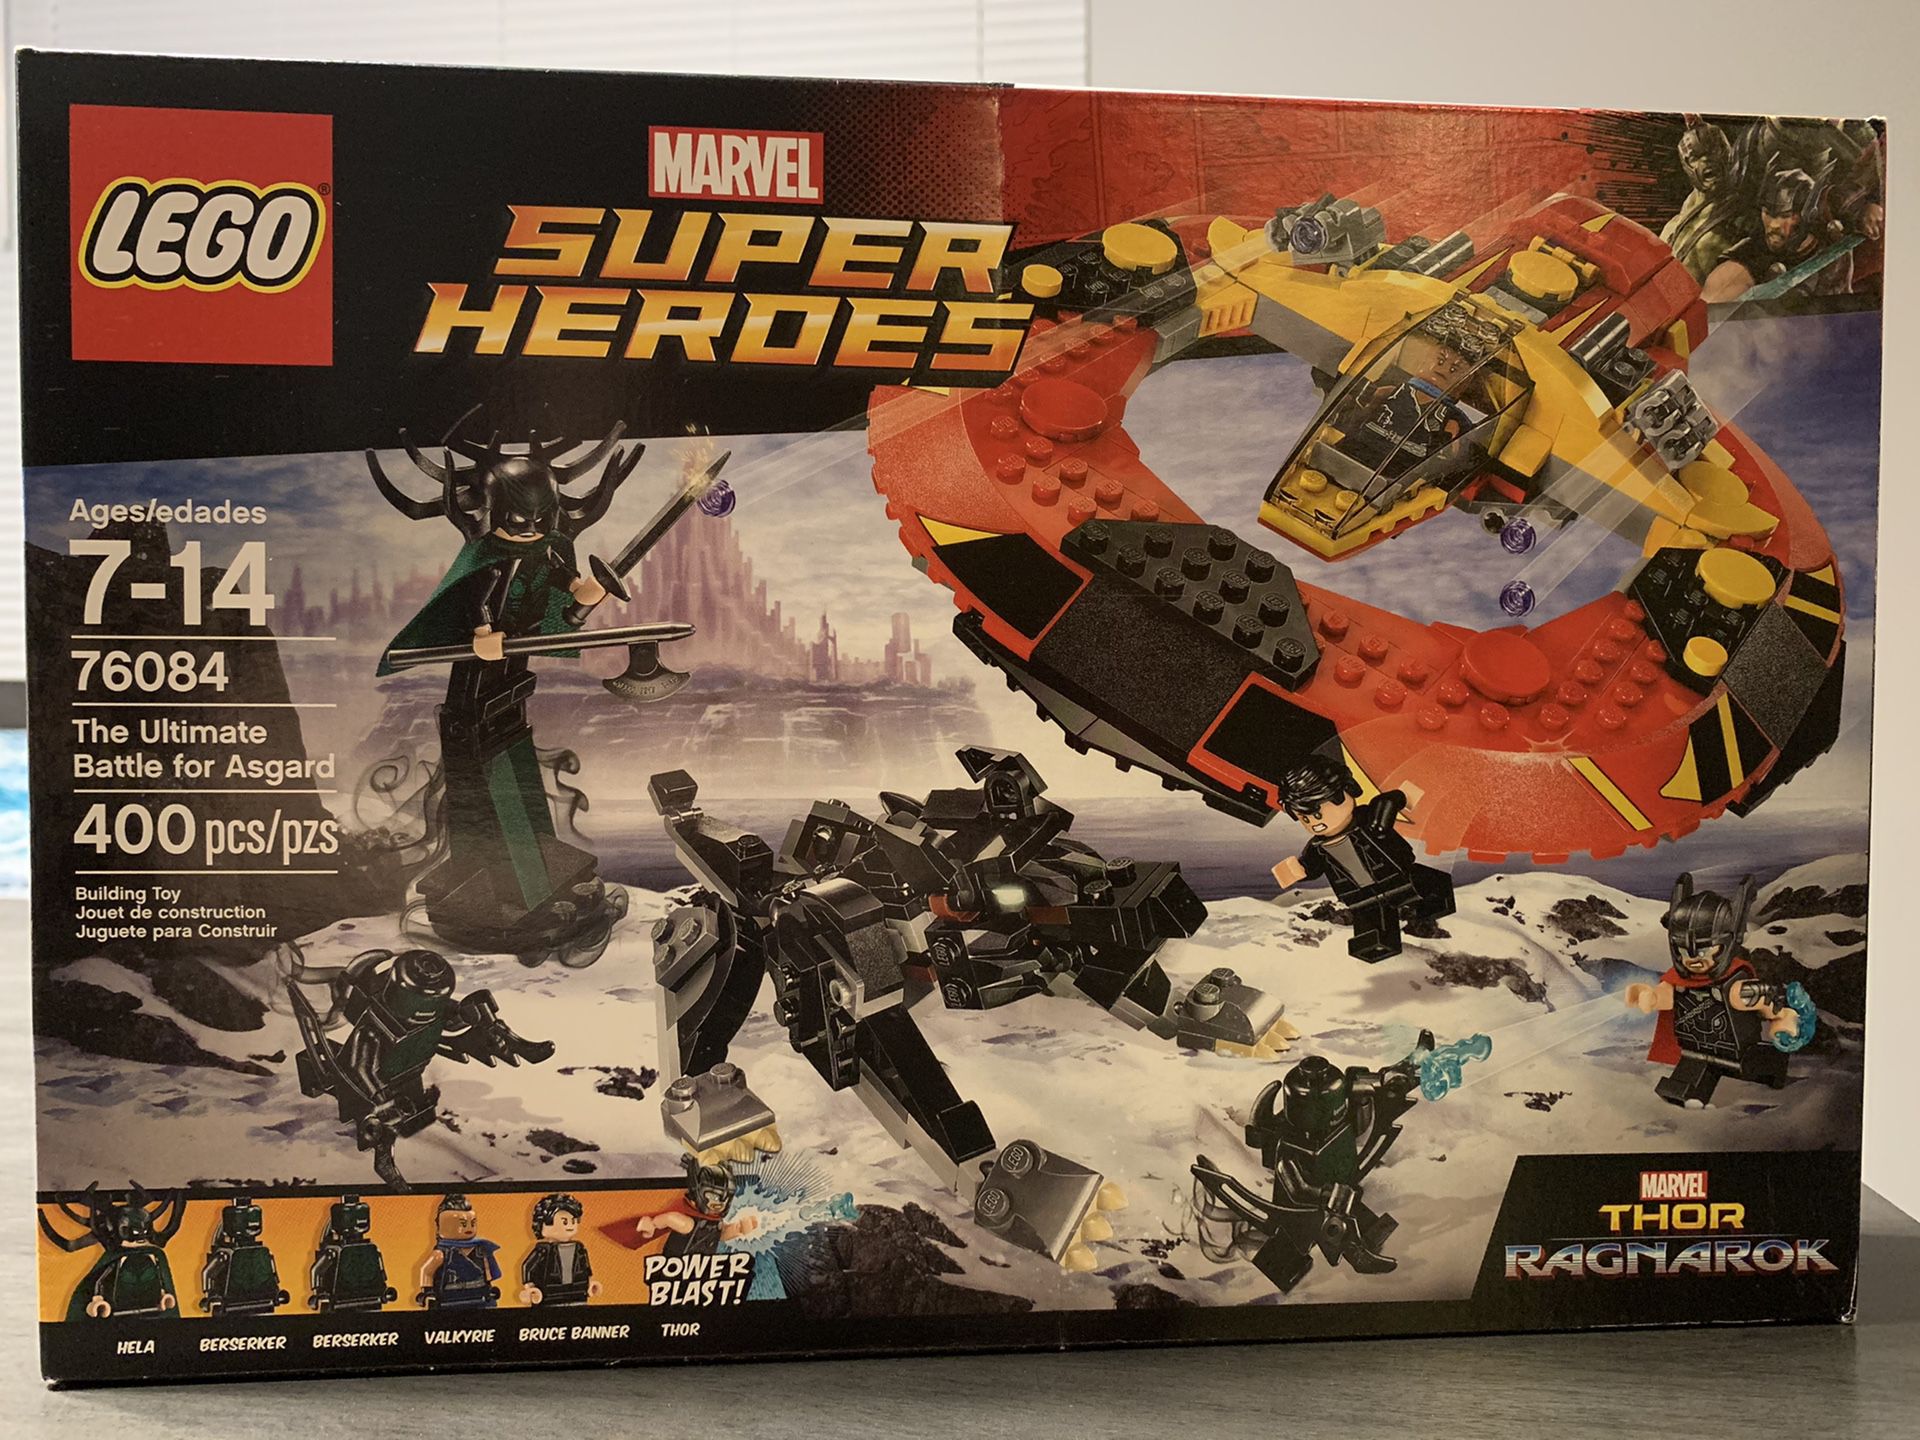 Lego Marvel Super Heroes The Ultimate Battle for Asgard